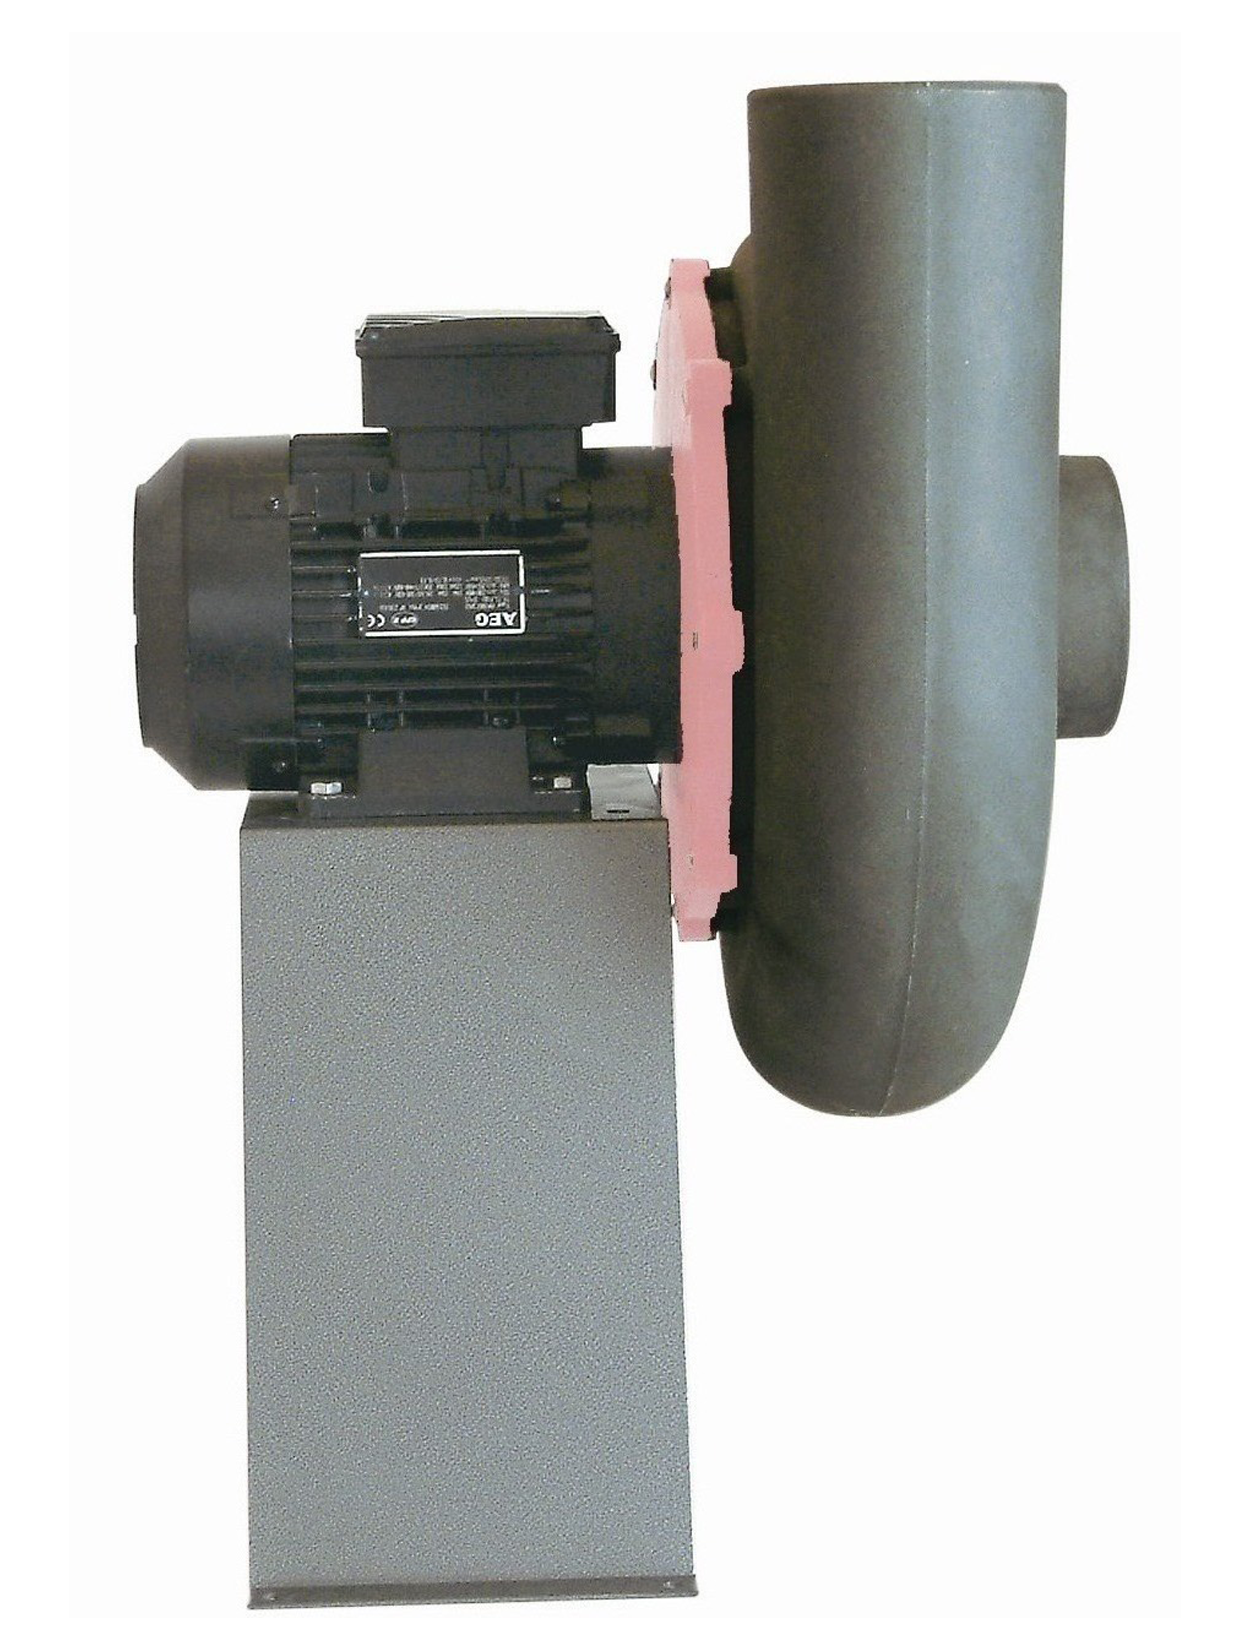 Storm 14 High Static Pressure Direct Drive Forward Curve Polypropylene Blower mounted on stand